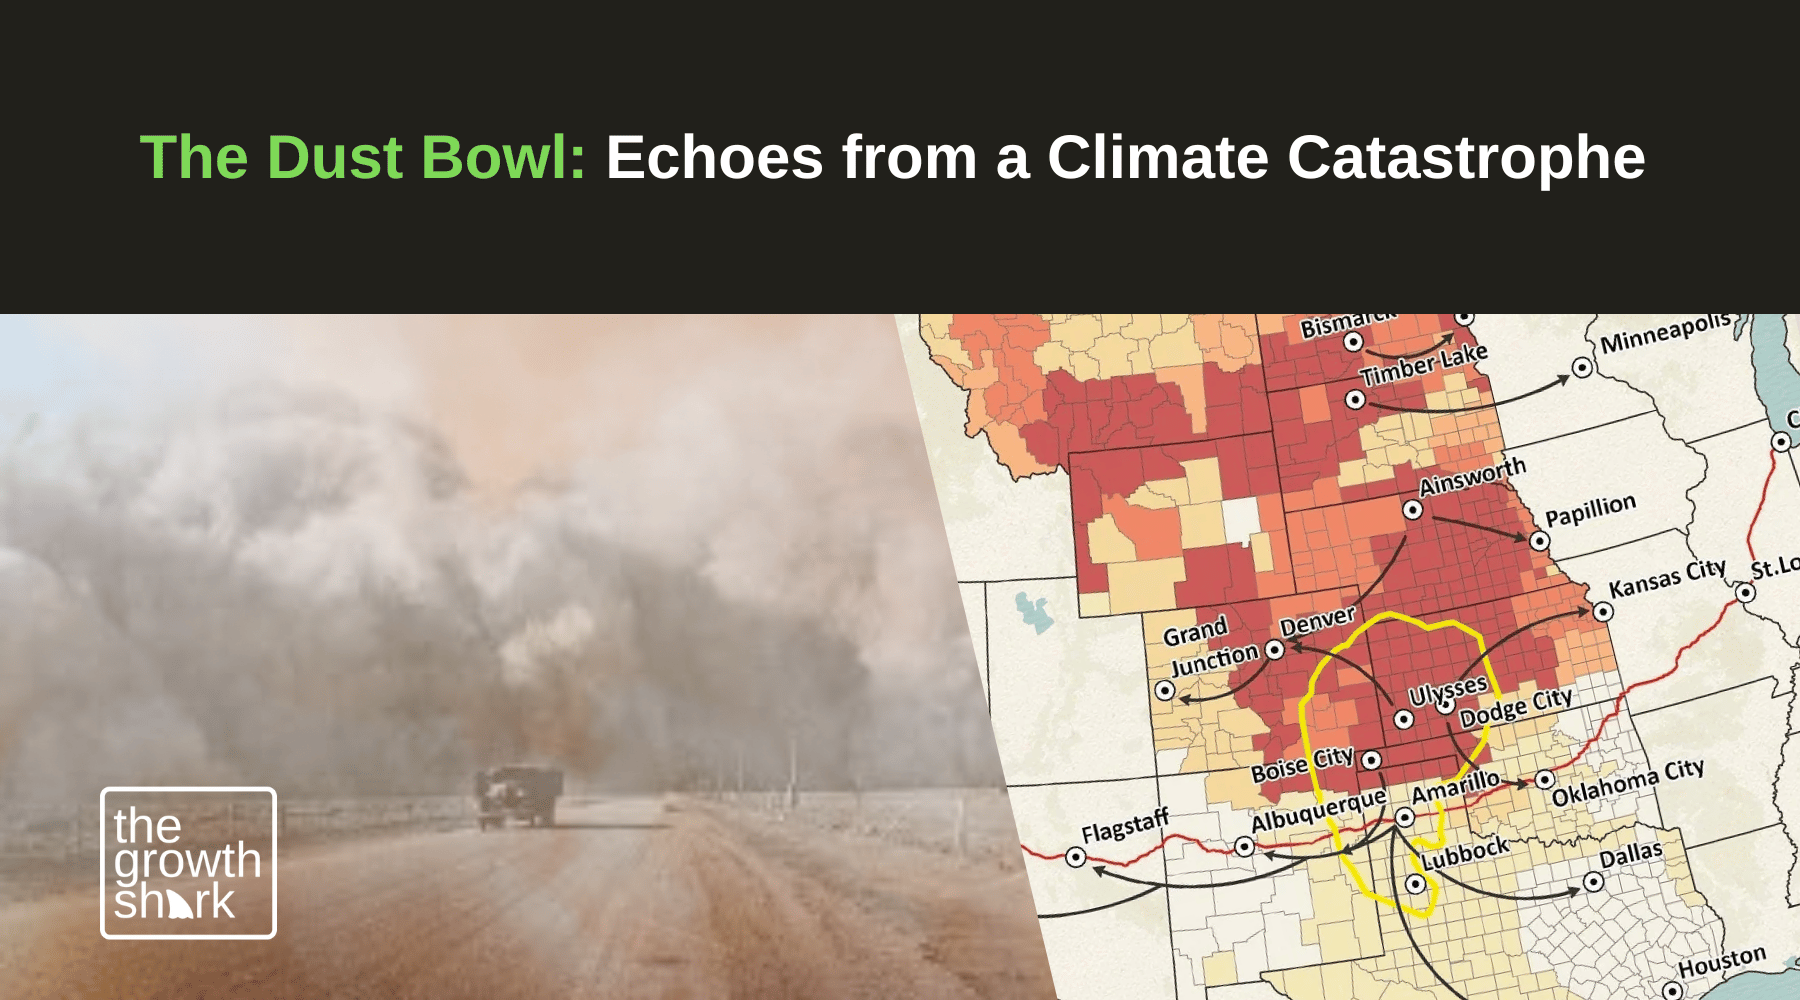 The Dust Bowl: Echoes from a Climate Catastrophe